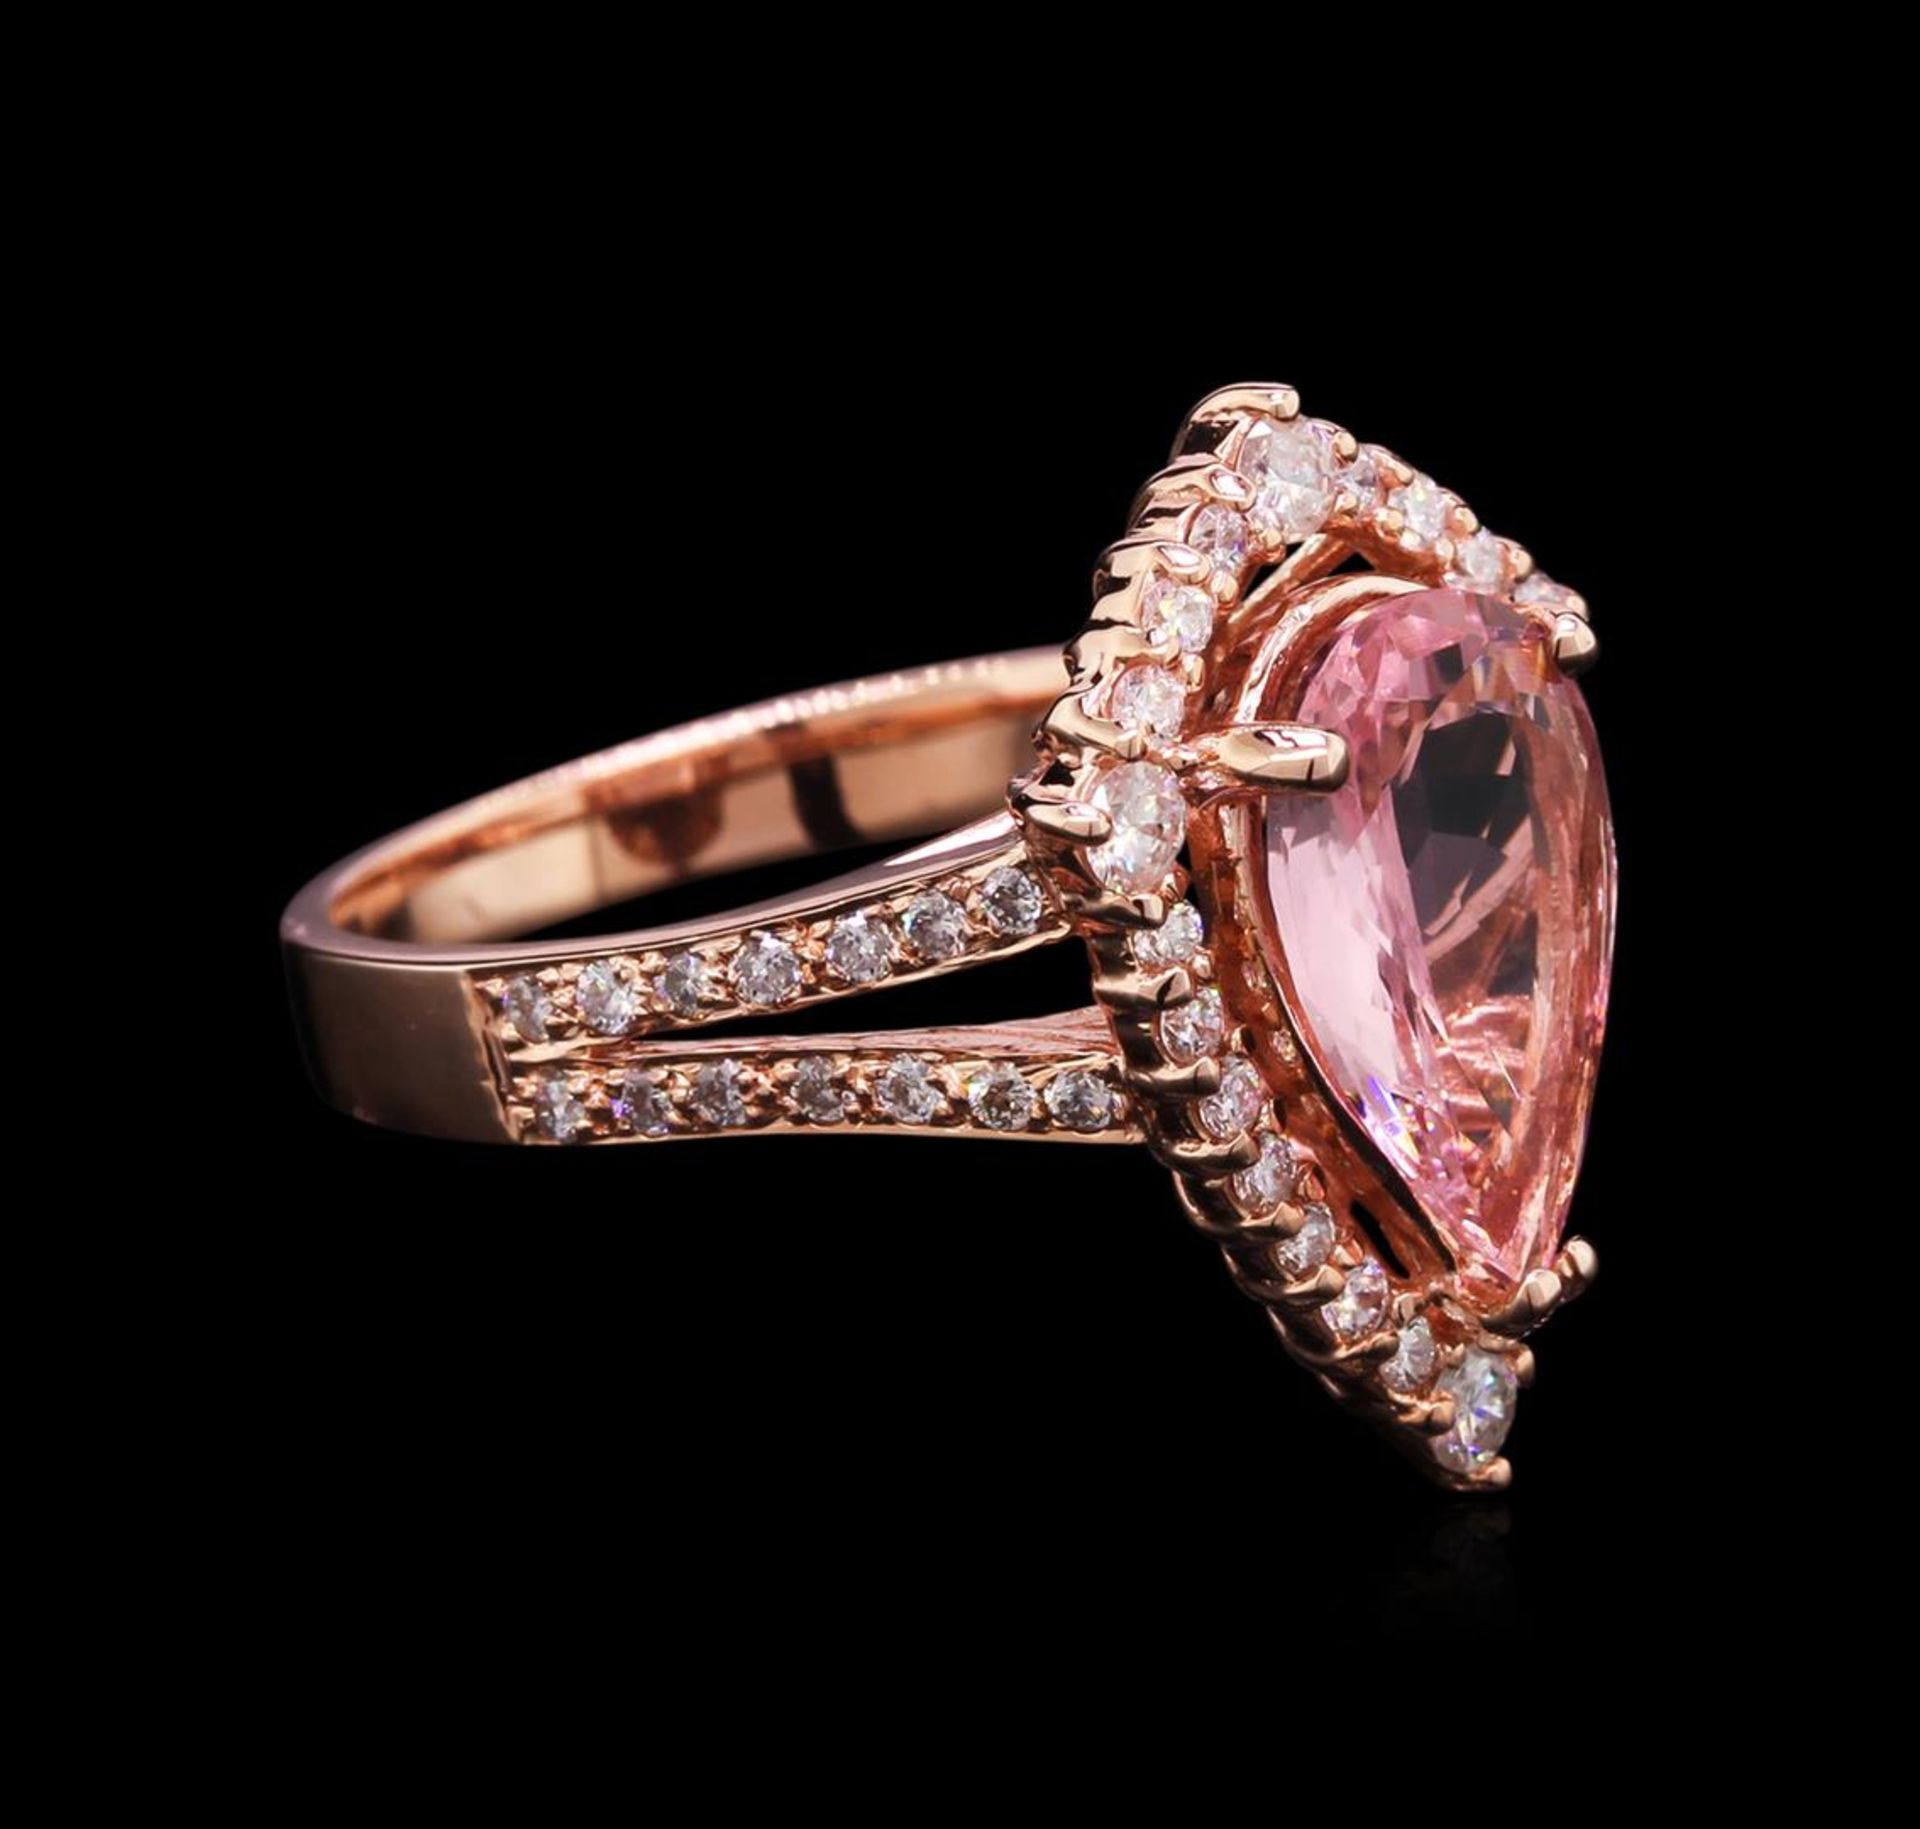 2.27 ctw Pink Tourmaline and Diamond Ring - 14KT Rose Gold - Image 2 of 2